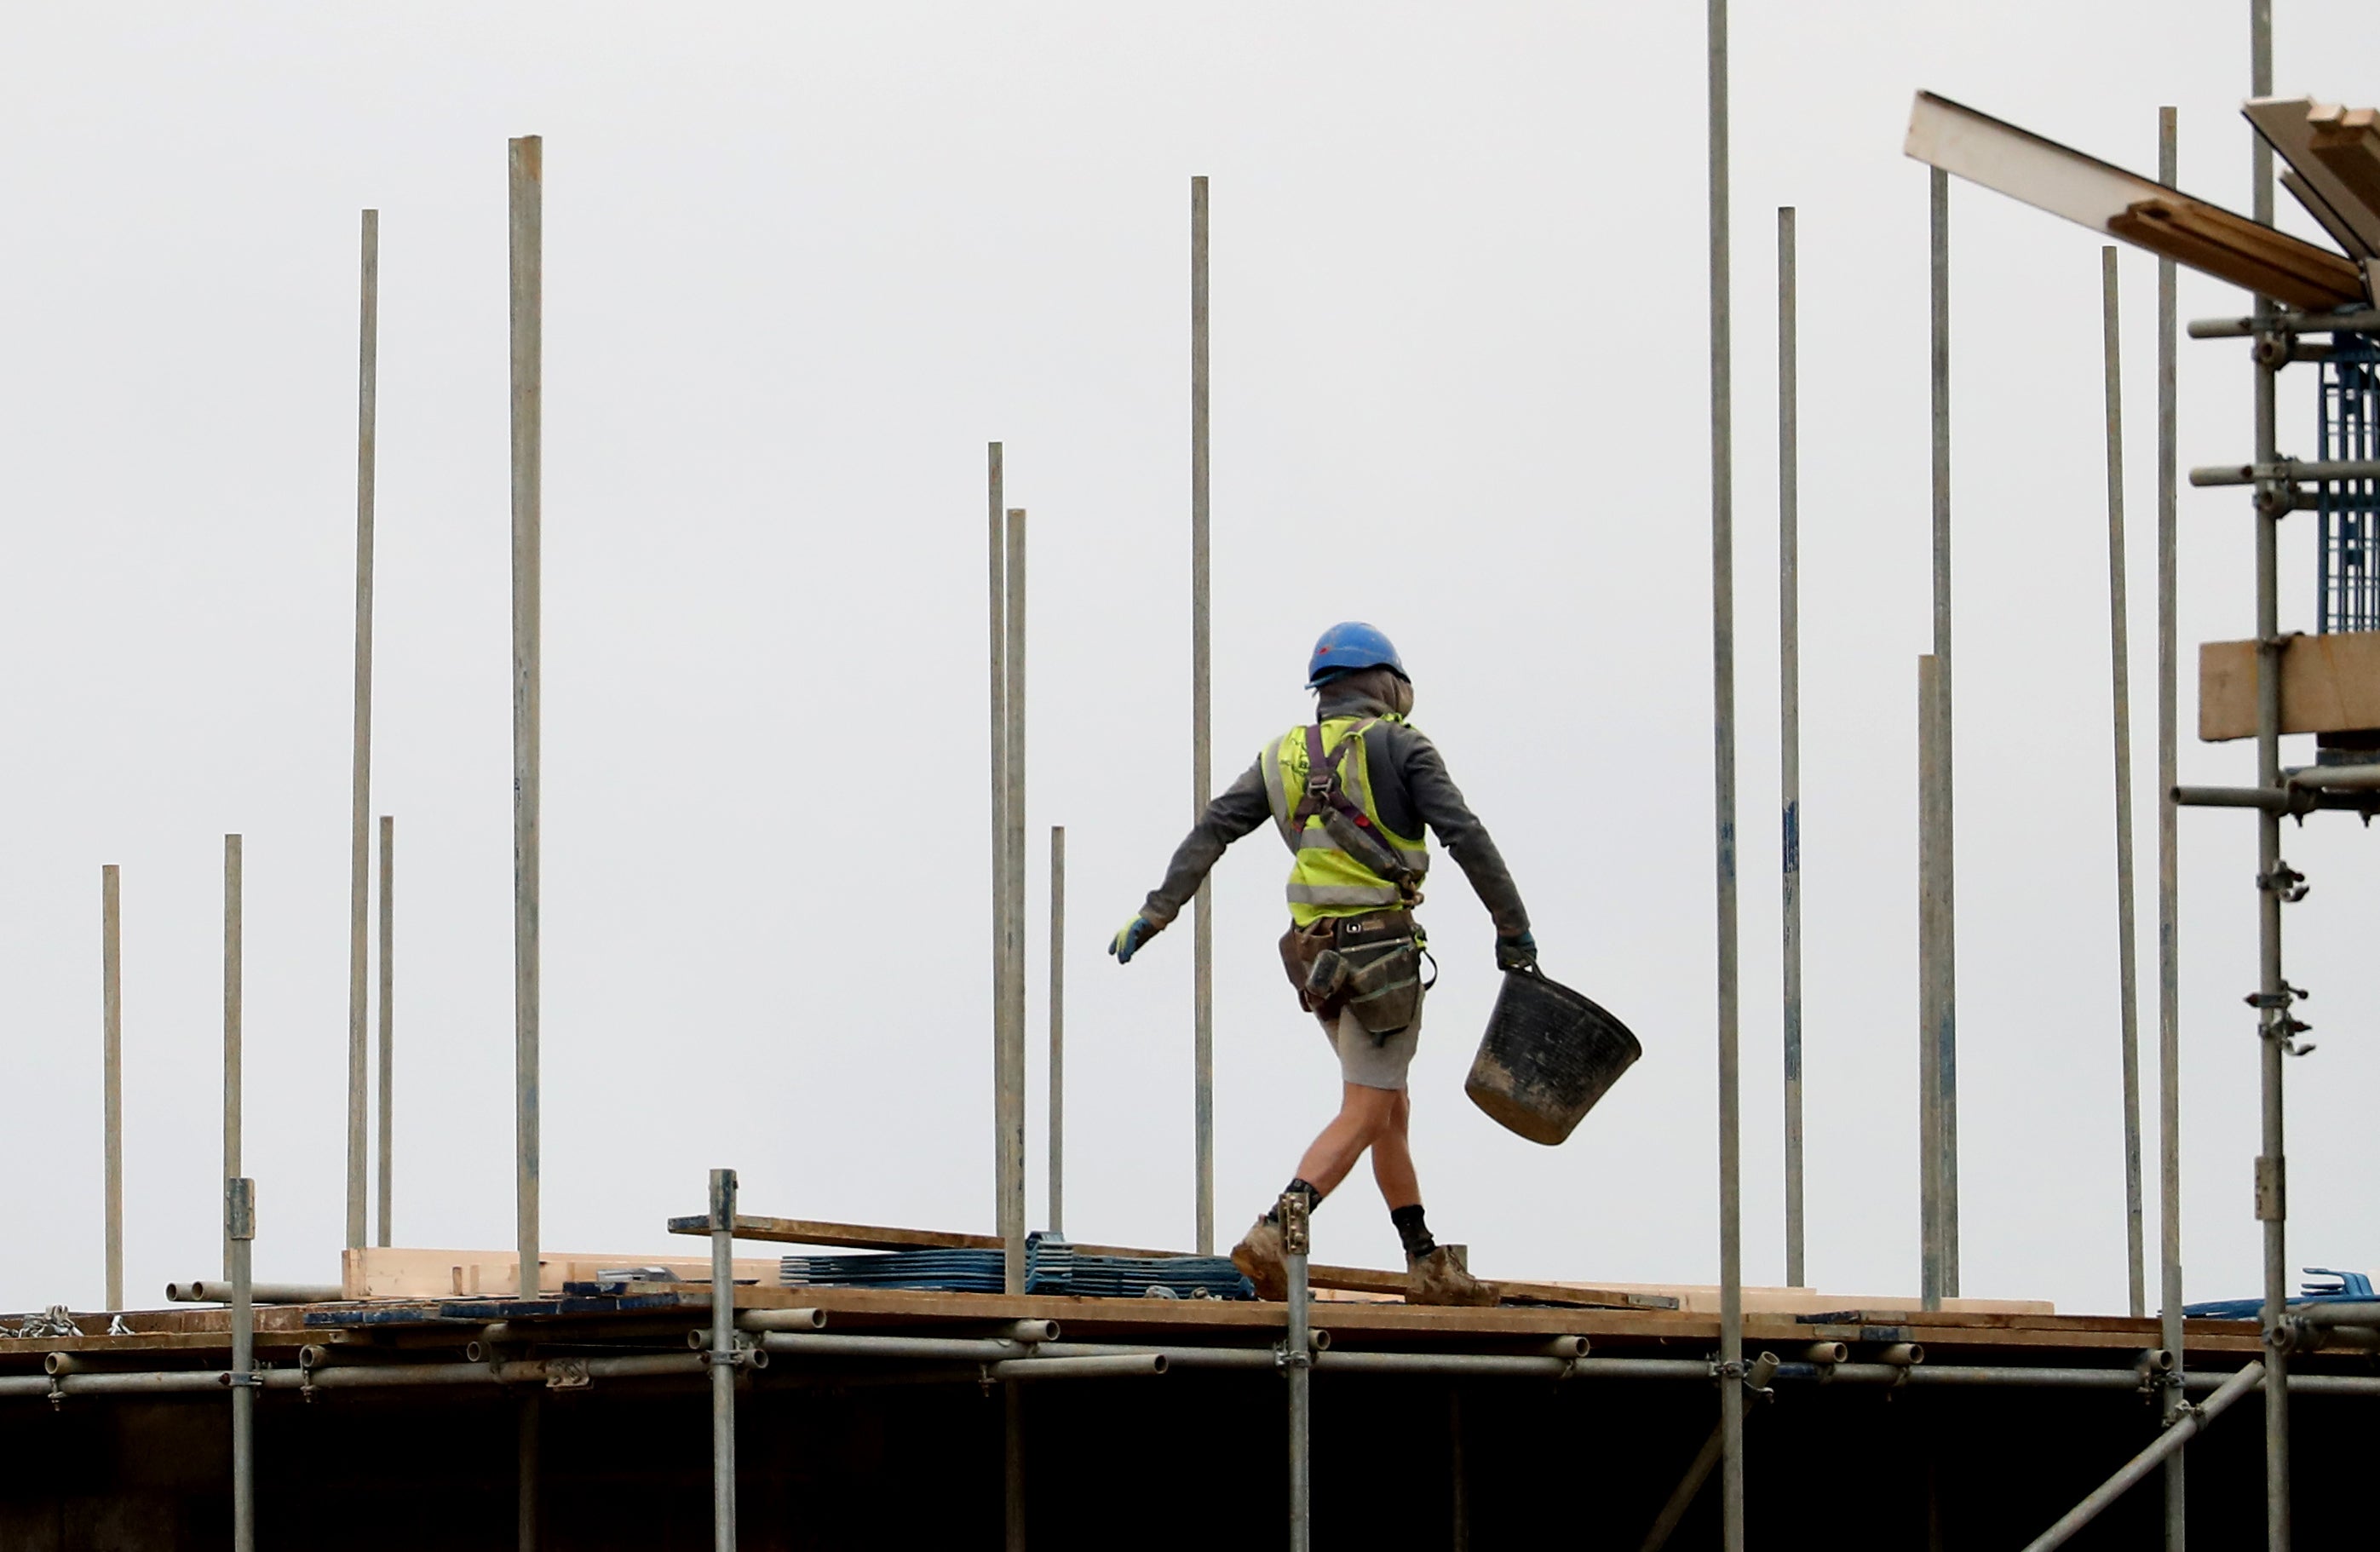 Construction is improving, with cost inflation easing, a new survey has found. (Gareth Fuller / PA)